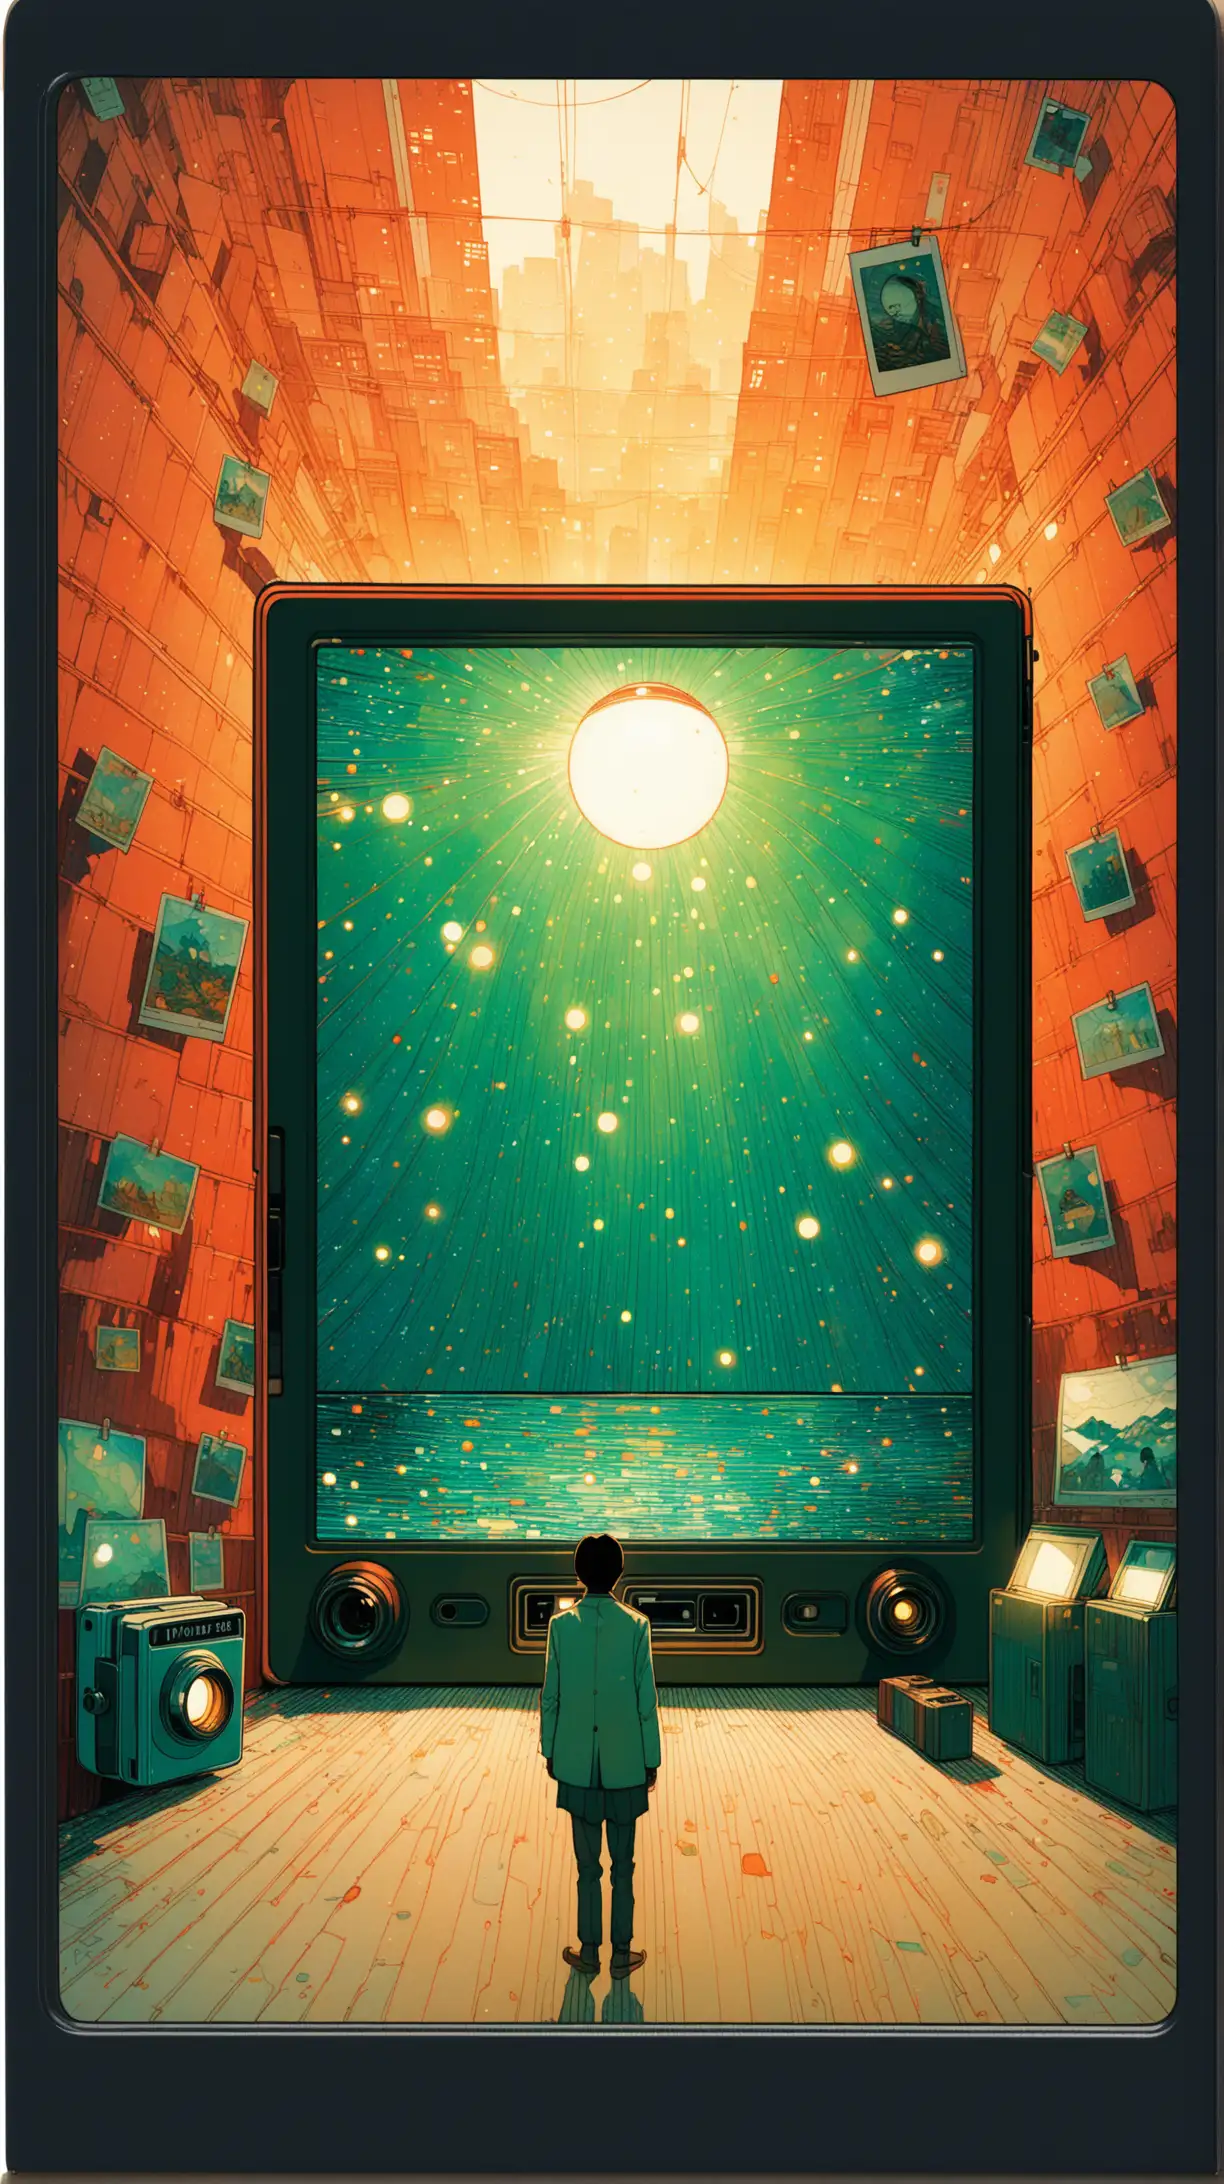  8k, ray tracing, LED, art by Zeng Fanzhi, creepy, by Victto Ngai, instax, screen, enosis, busy